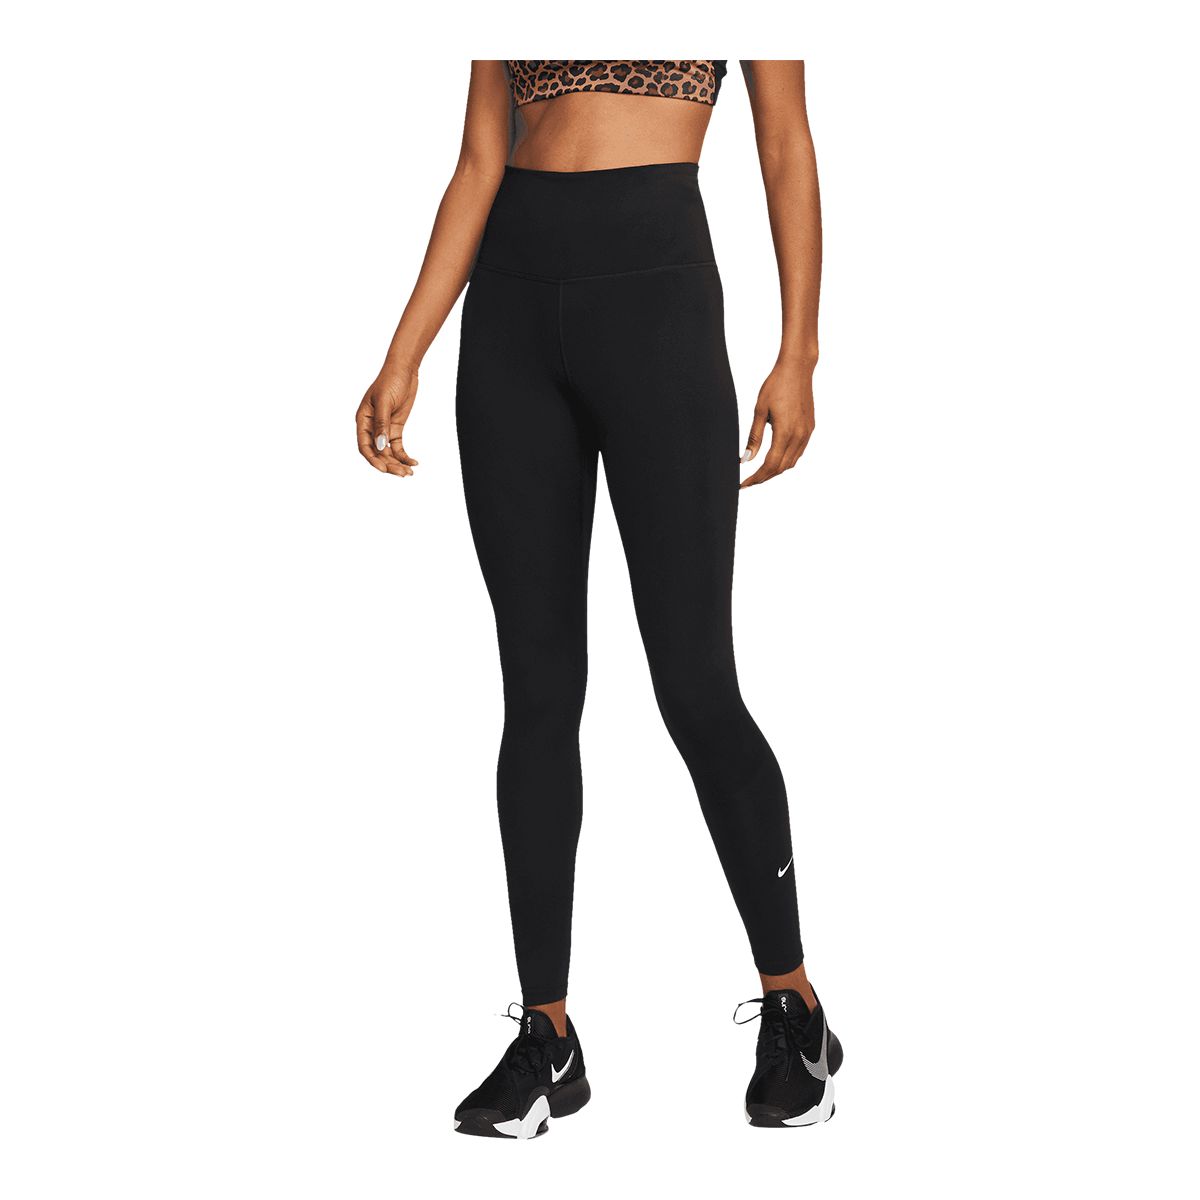 Image of Nike Women's One Dri-FIT High Rise Tights